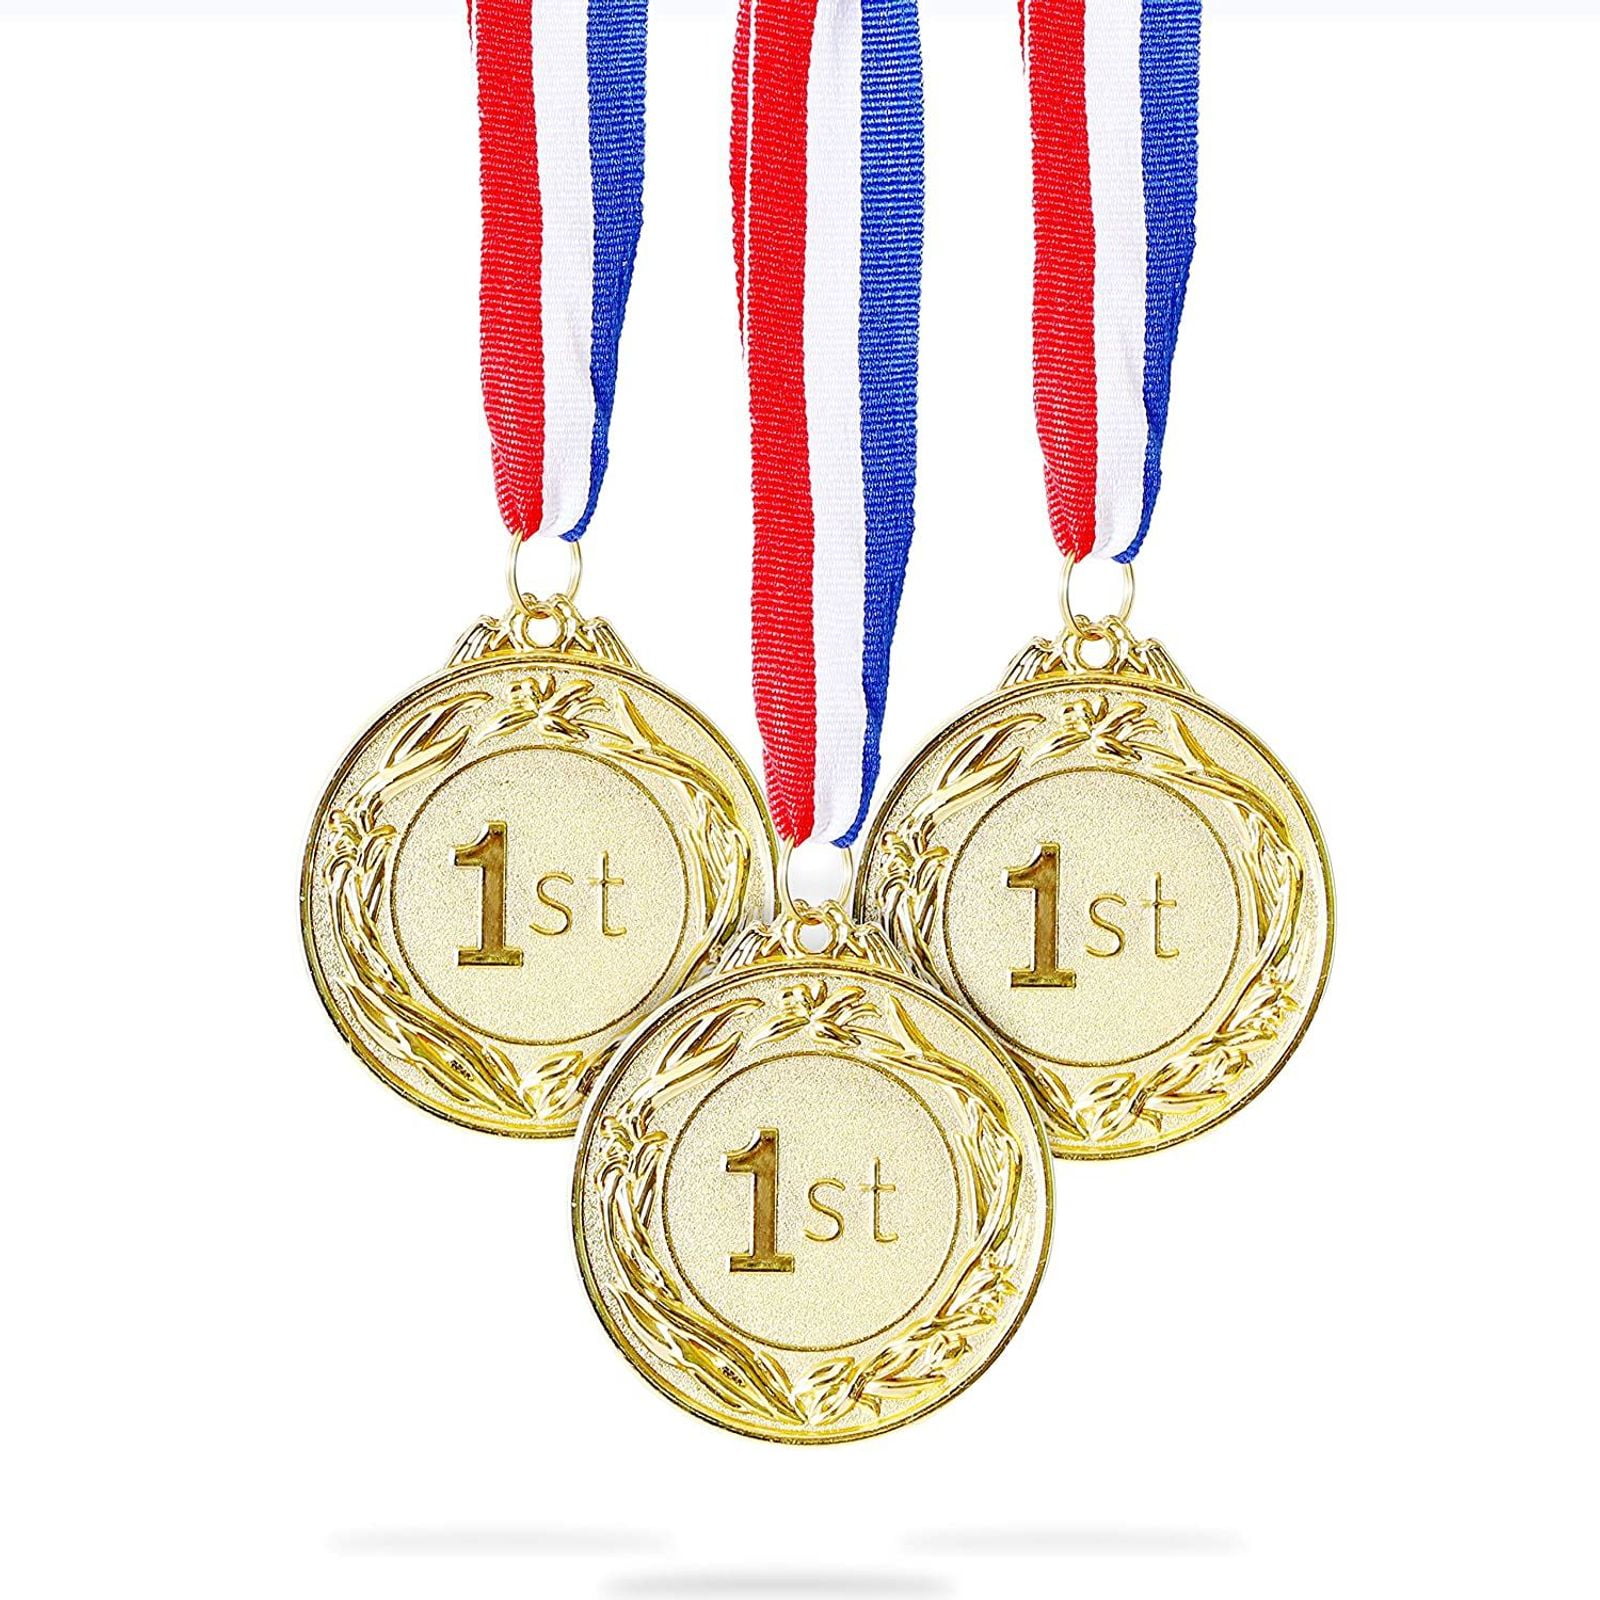 RIBBONS CERTIFICATES = FOOTBALL TRAINING SET OF 5 TOP QUALITY METAL MEDALS 